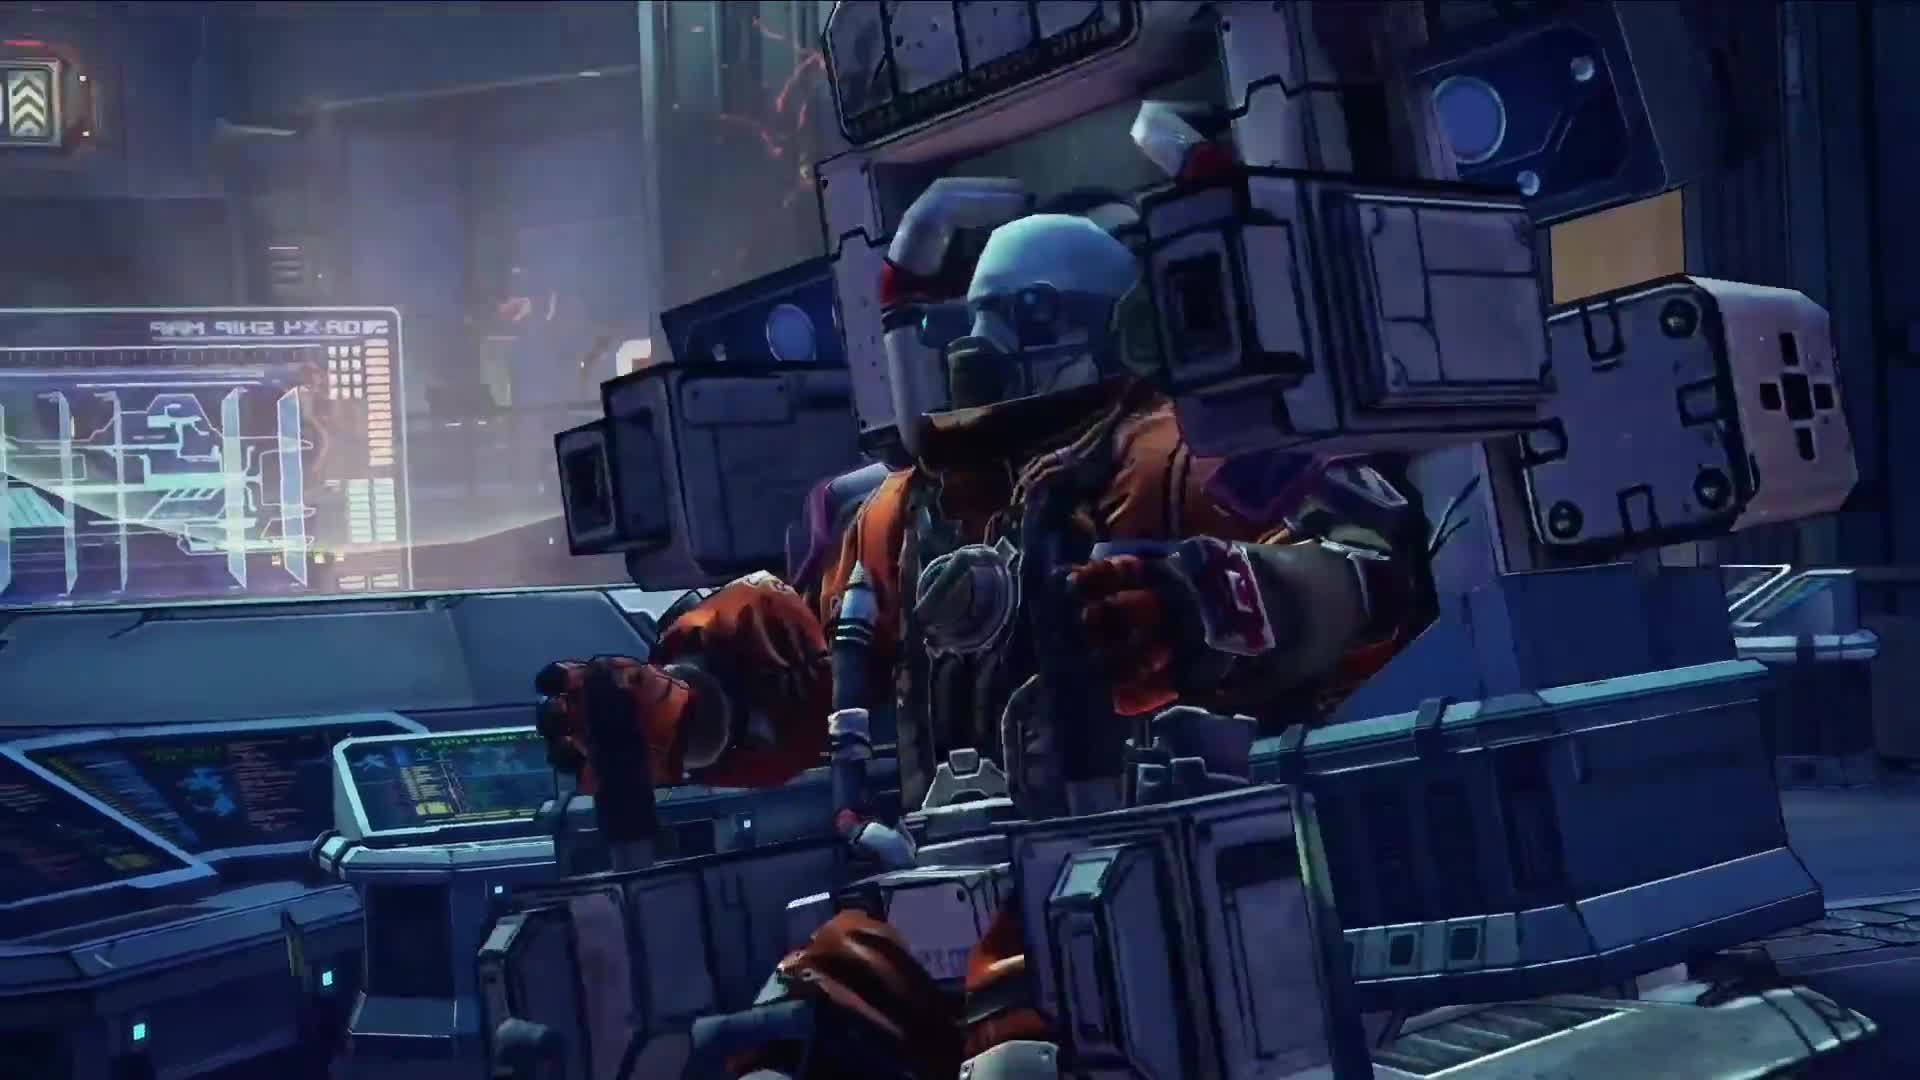 Borderlands: The Pre-Sequel - An Introduction by Sir Hammerlock and Torgue